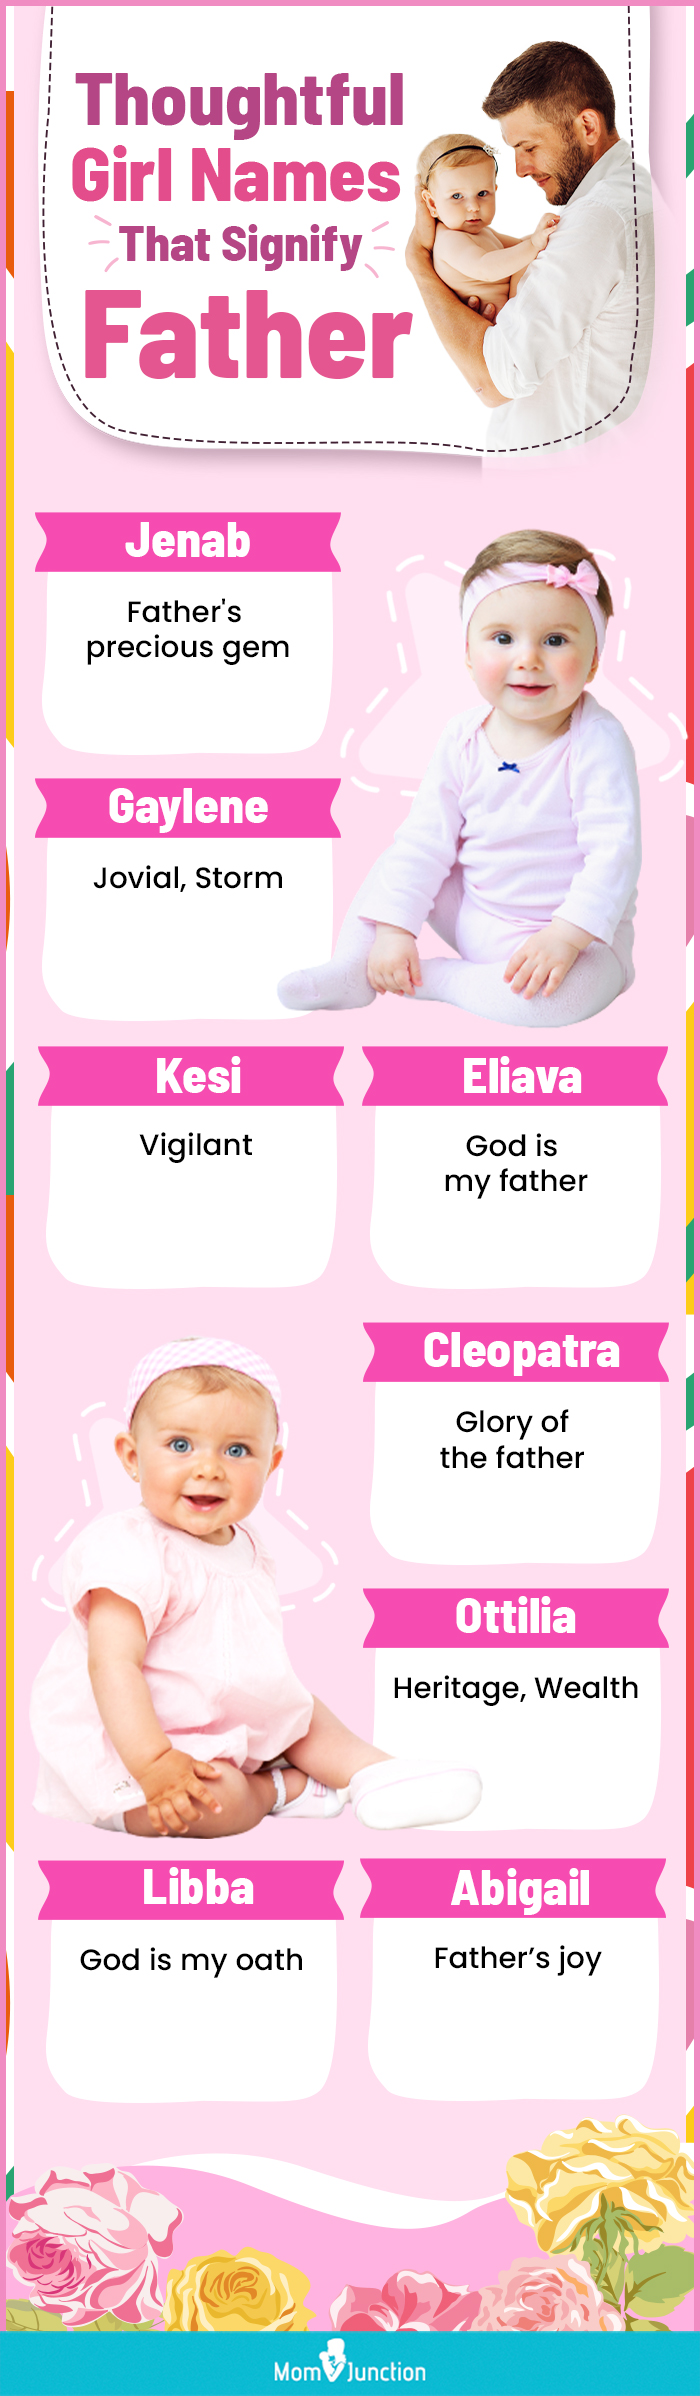 thoughtful girl names that signify father (infographic)